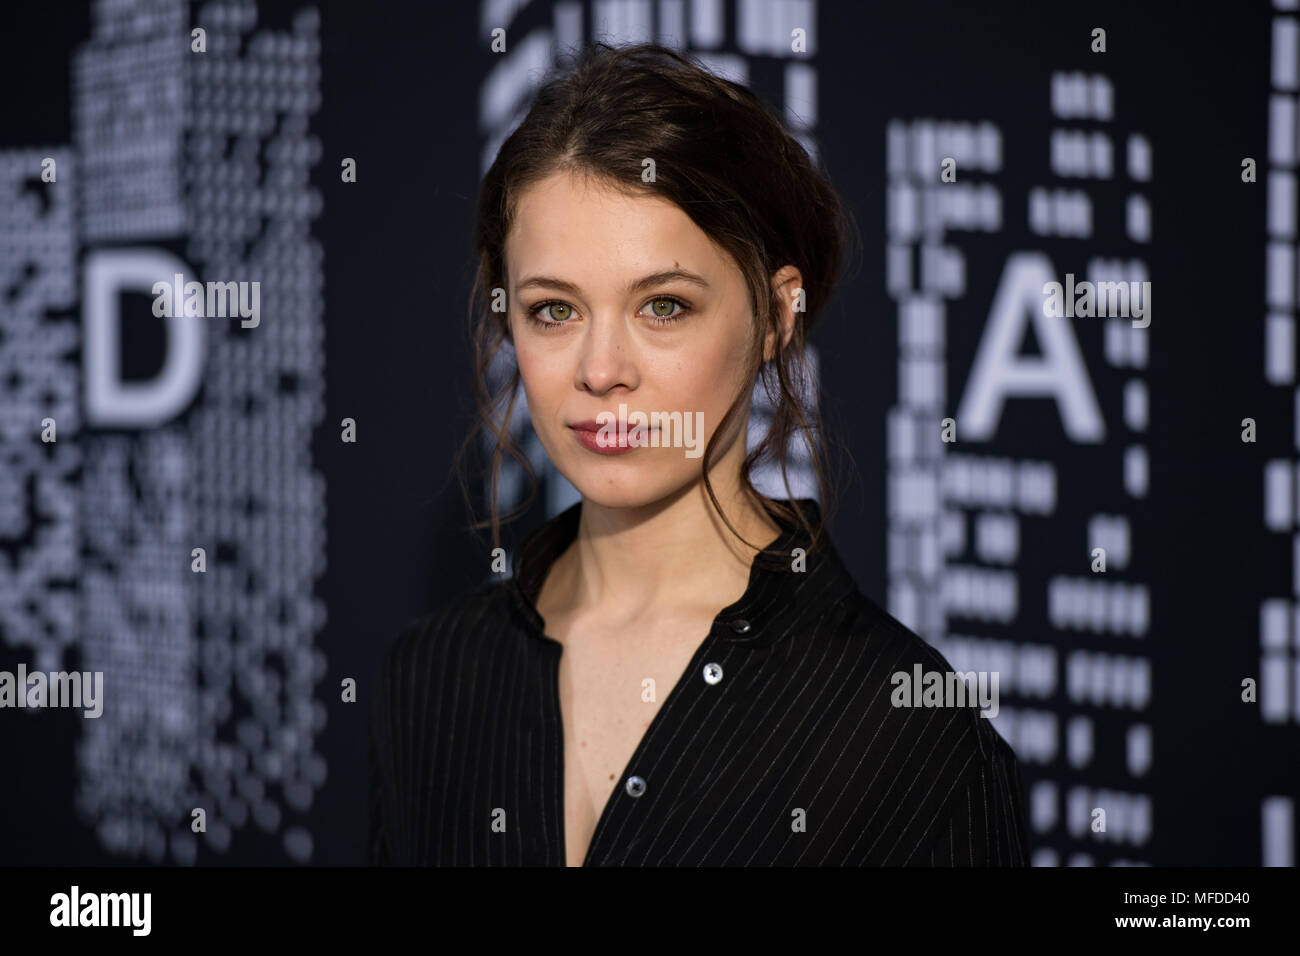 The Actress Paula Beer Looks At The Camera On January 16 2018 In Hamburg During A Photo Session